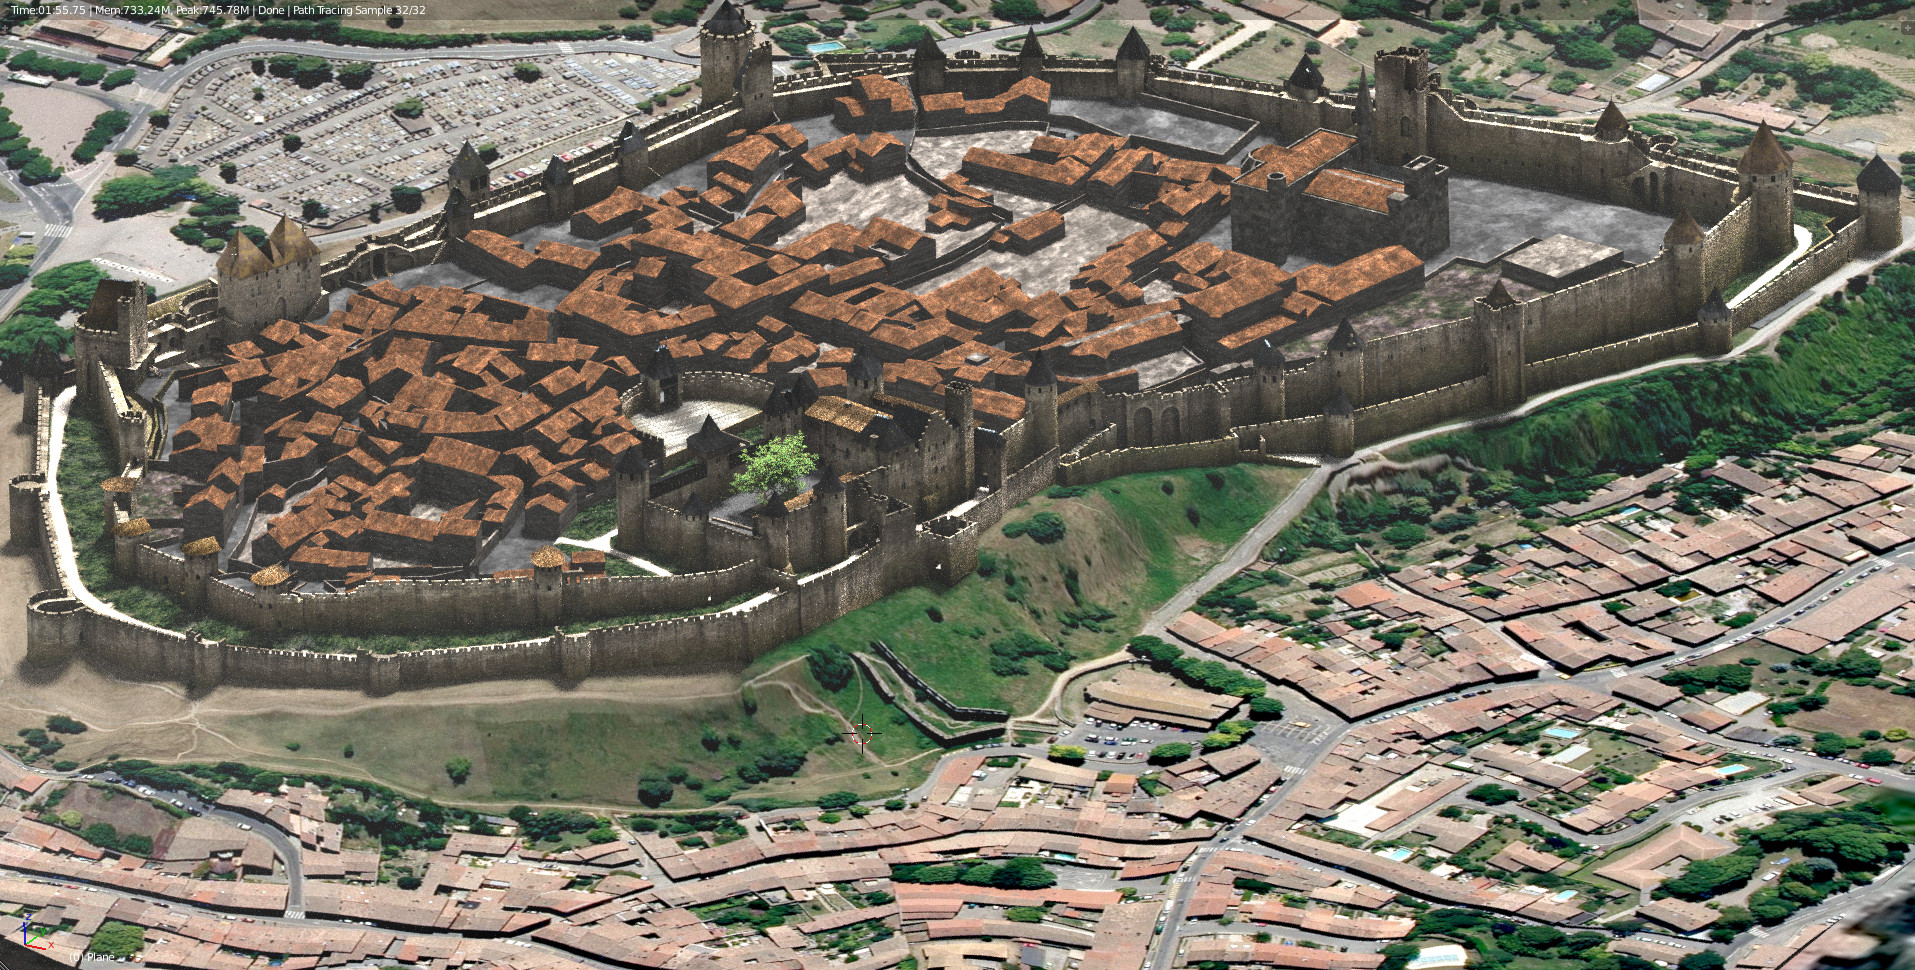 The medieval city in 3D seen from the sky.